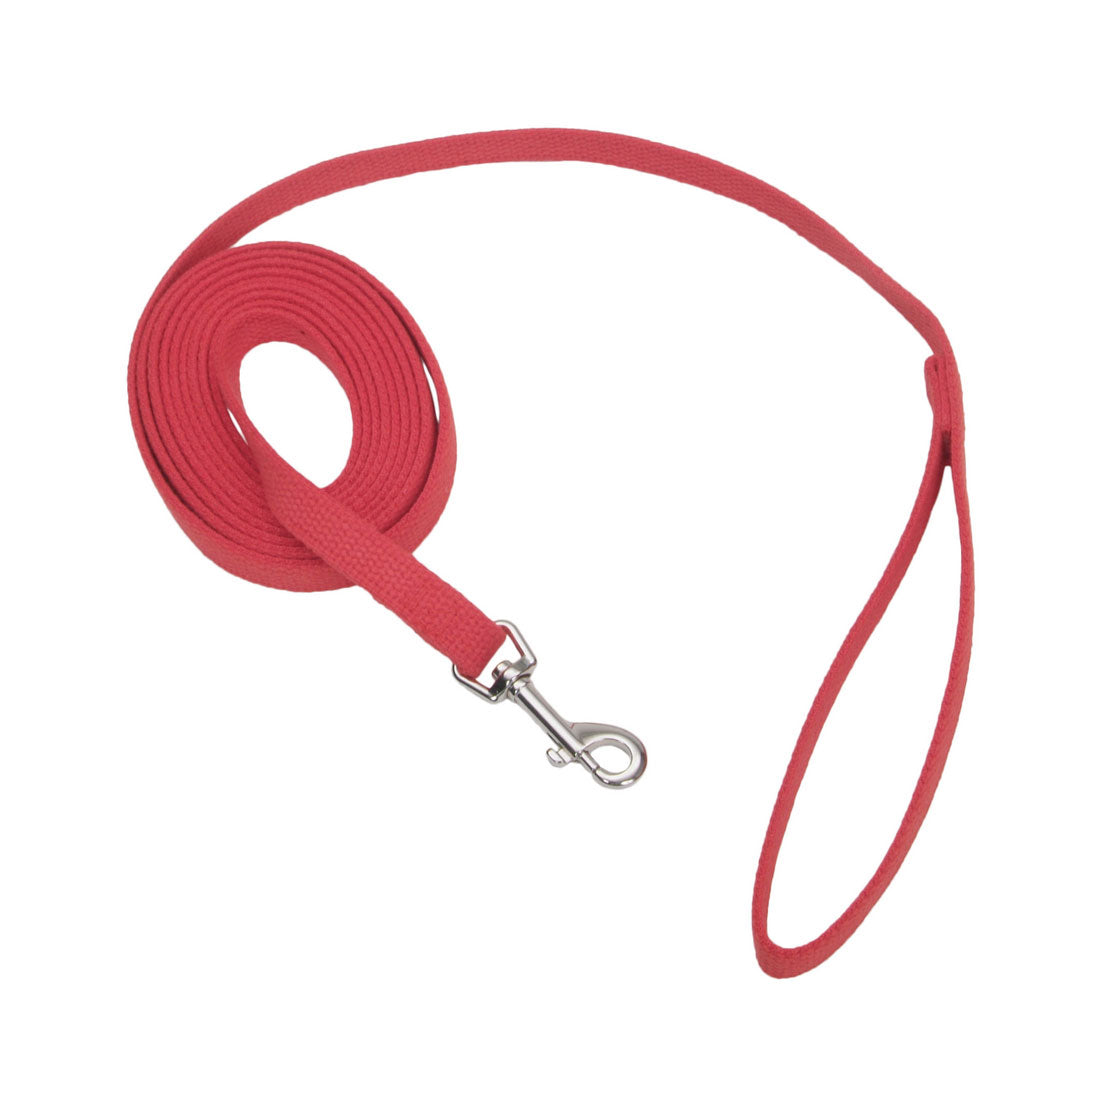 Coastal Pet Products Train Right Cotton Web Training Leash 30ft Red 5/8″ x 30ft – 00530-RED30